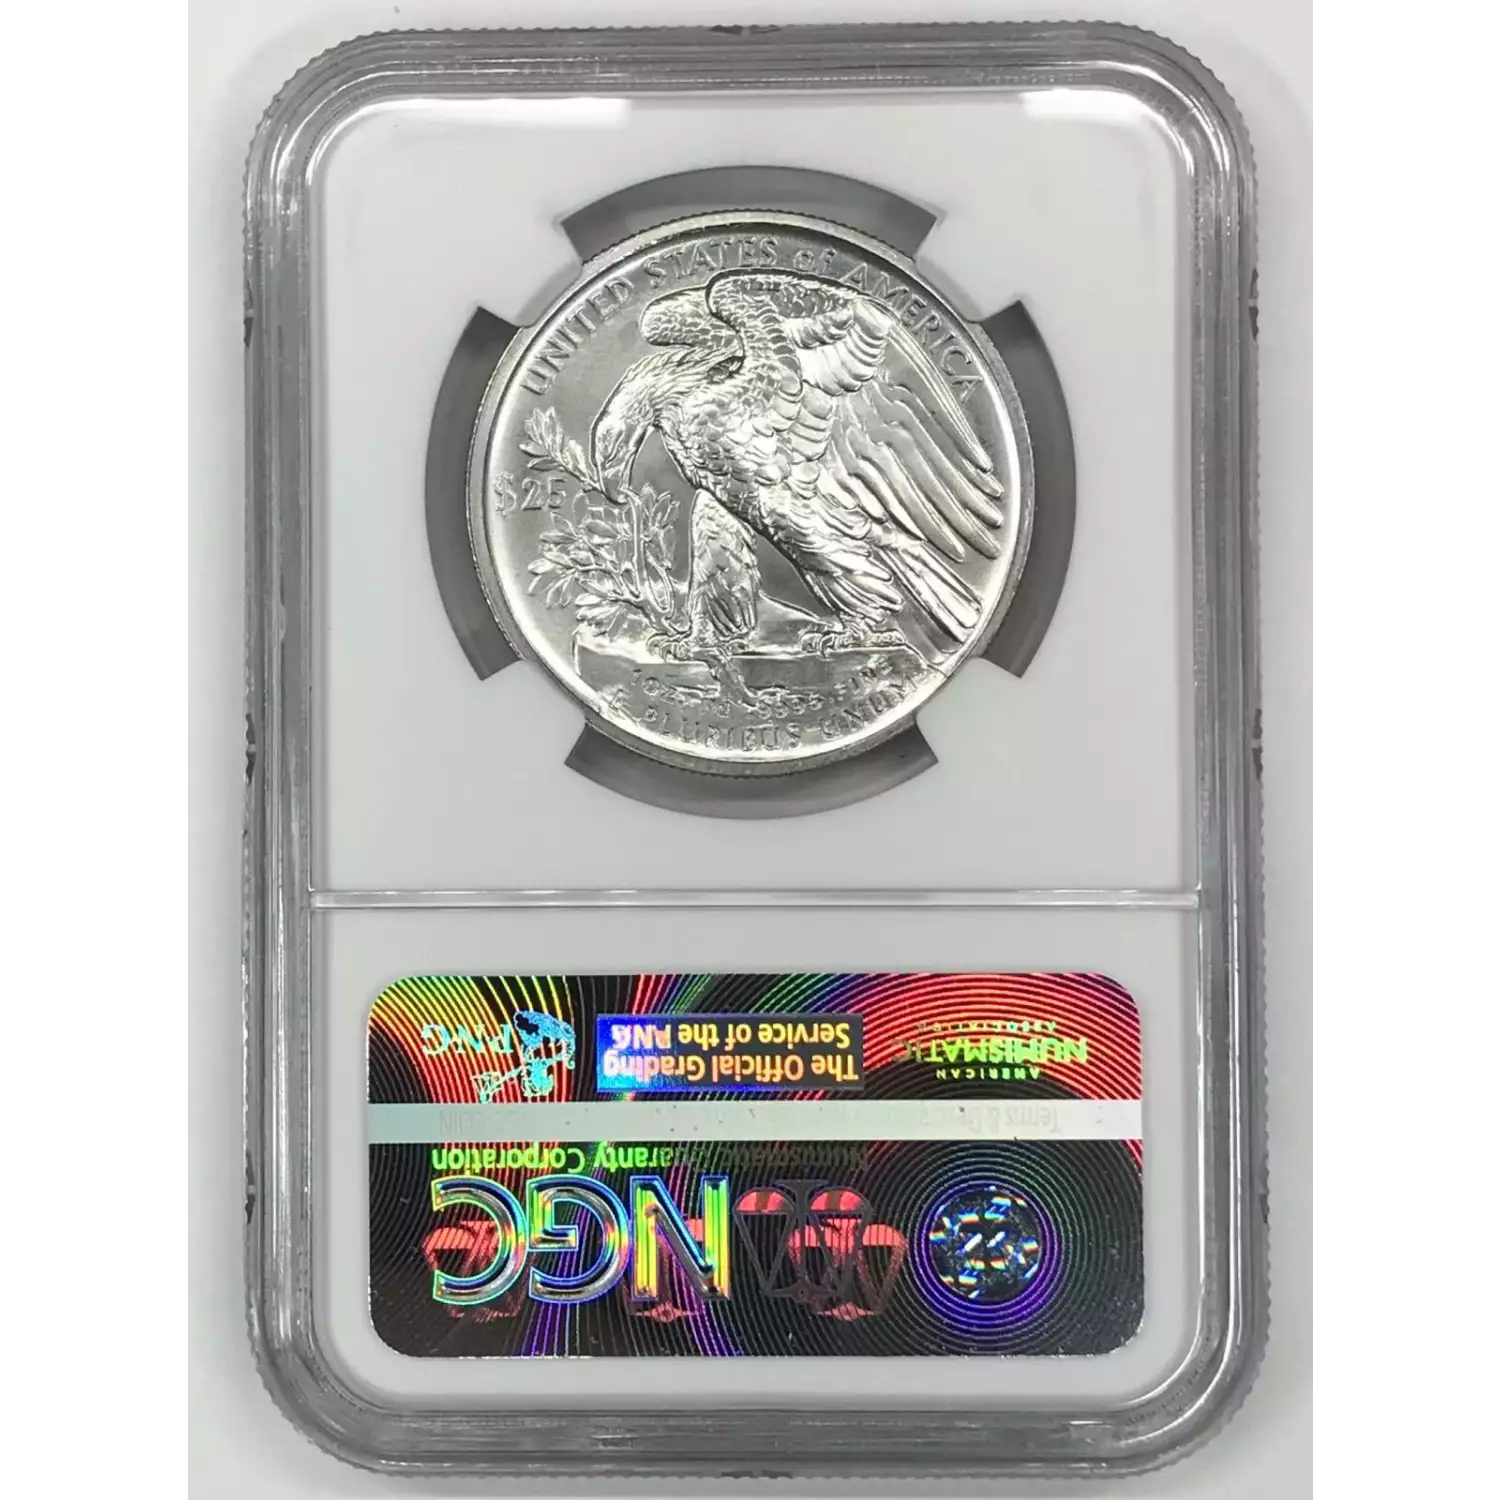 2017 HIGH RELIEF FIRST RELEASES FIRST PALLADIUM US COIN  (2)